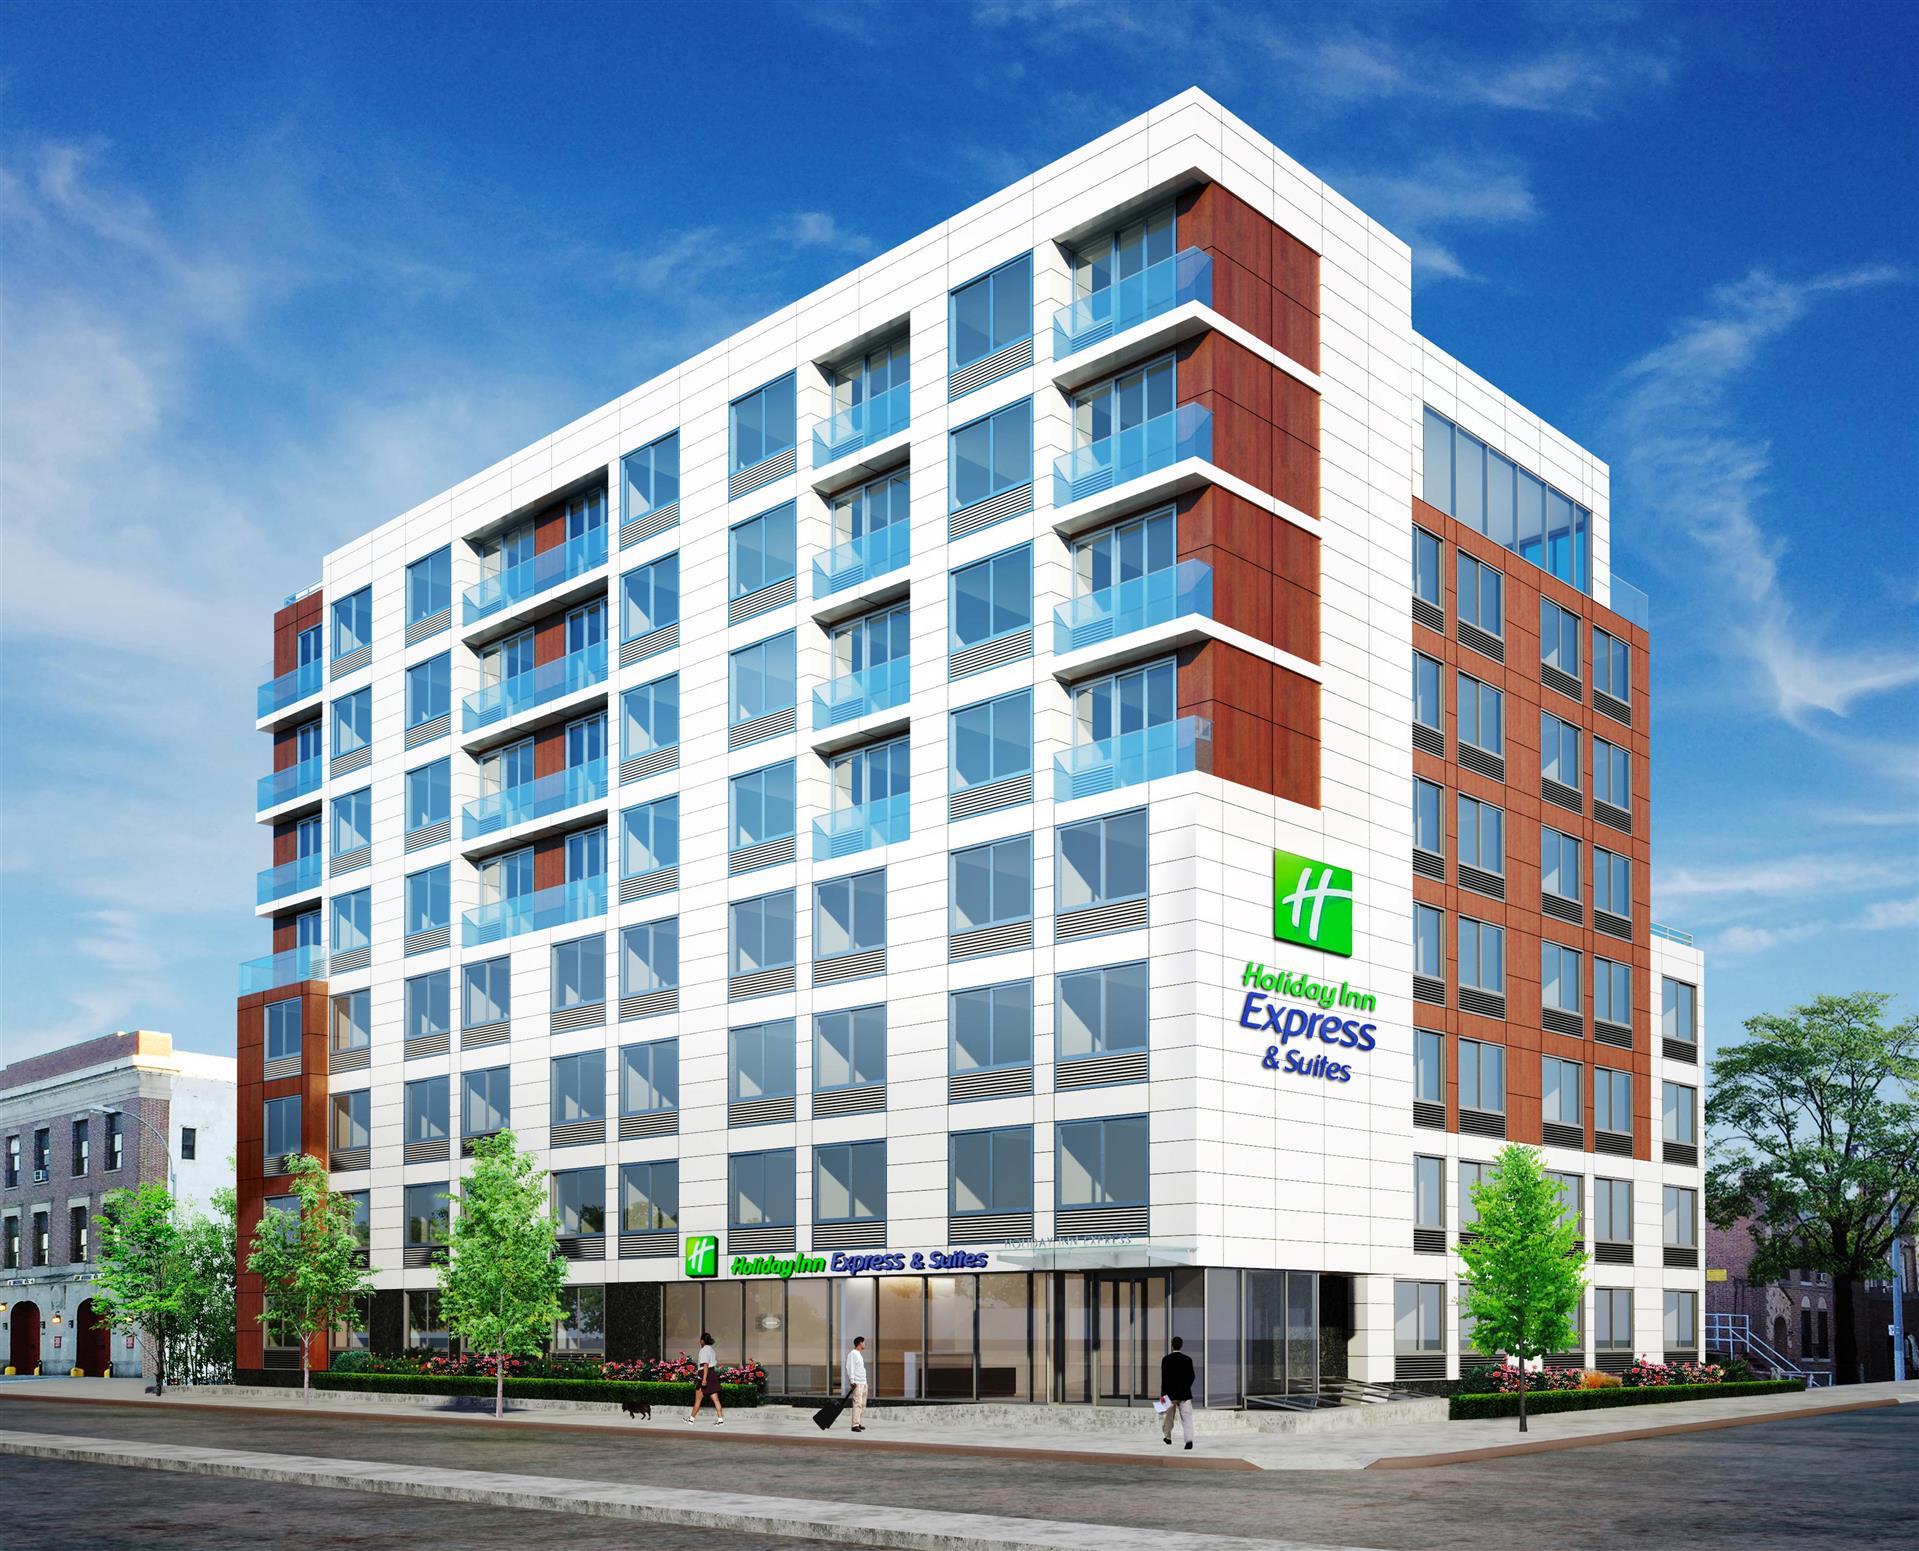 Holiday Inn Express & Suites Woodside Queens NYC in Woodside, NY